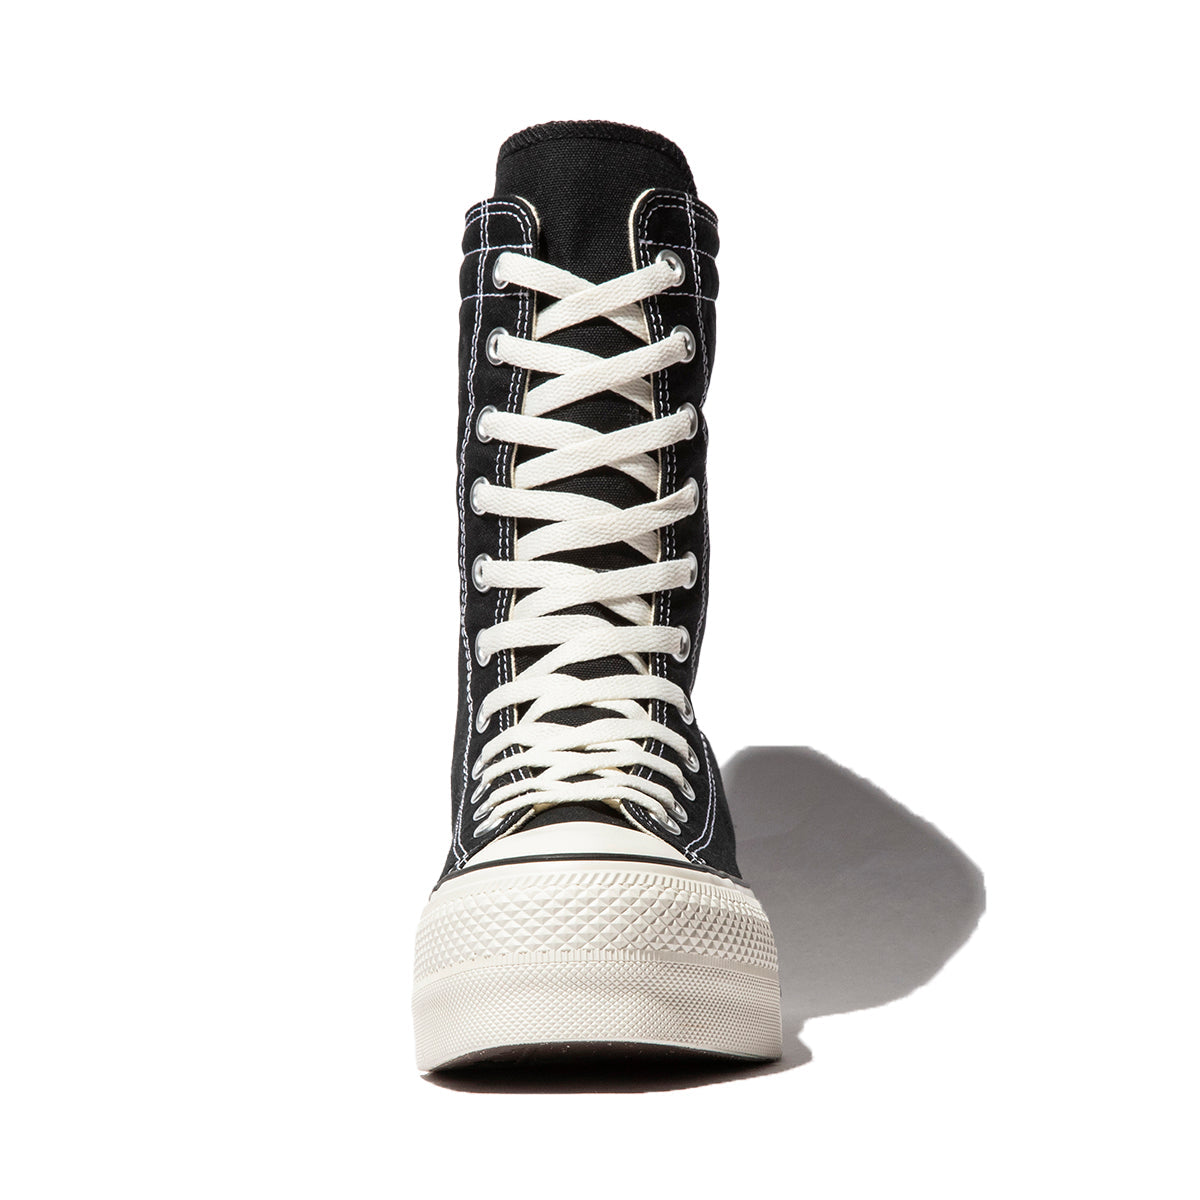 ALL STAR (R) LIFTED KNEE-HI – Kinetics｜OFFICIAL ONLINE STORE